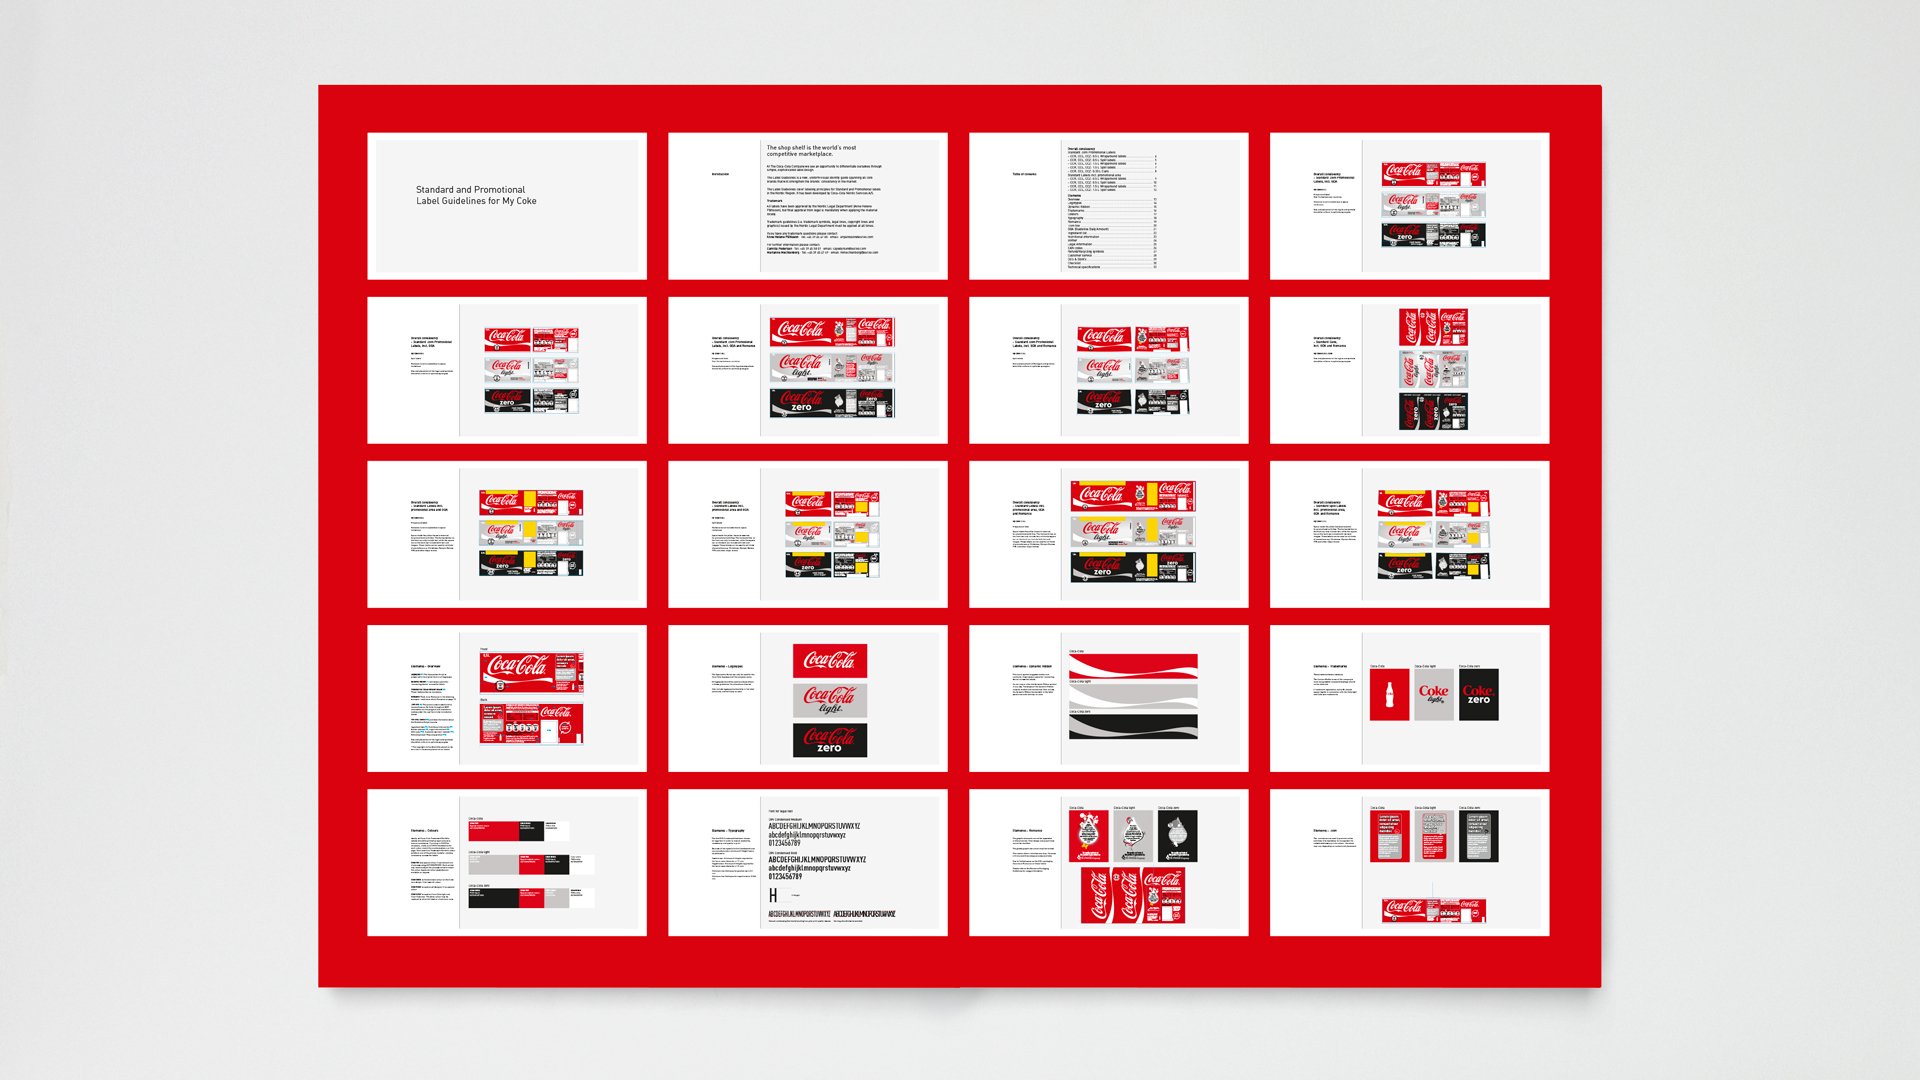 Coca-cola style guide overview by LOOP Associates